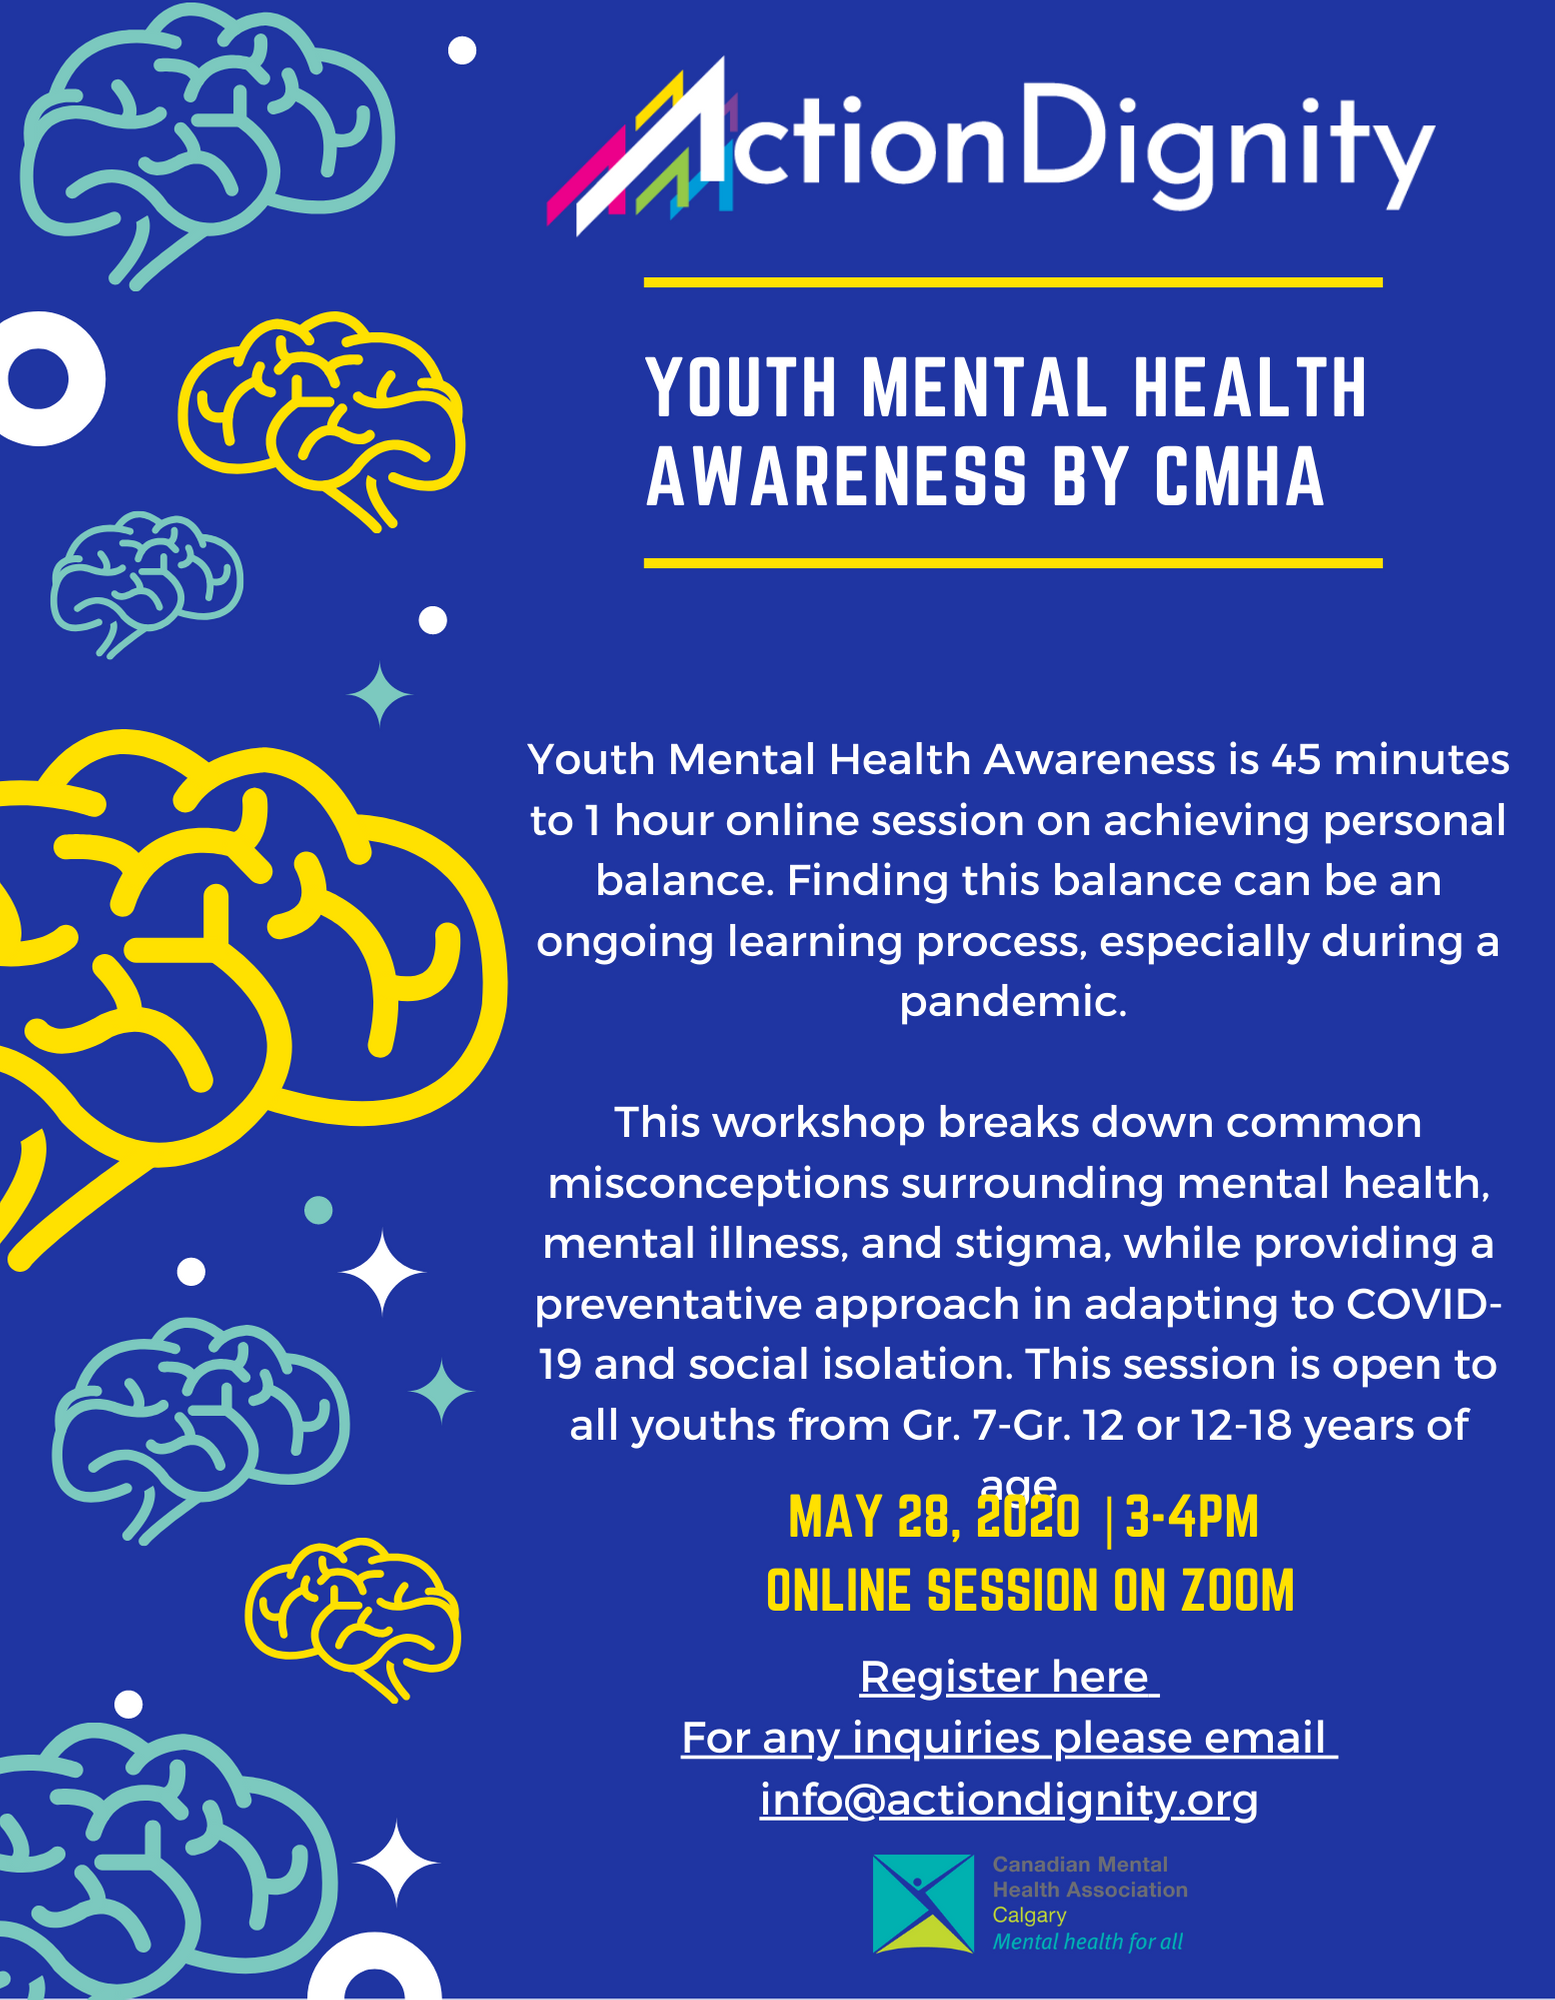 youth-mental-health-awareness-by-cmha-actiondignity